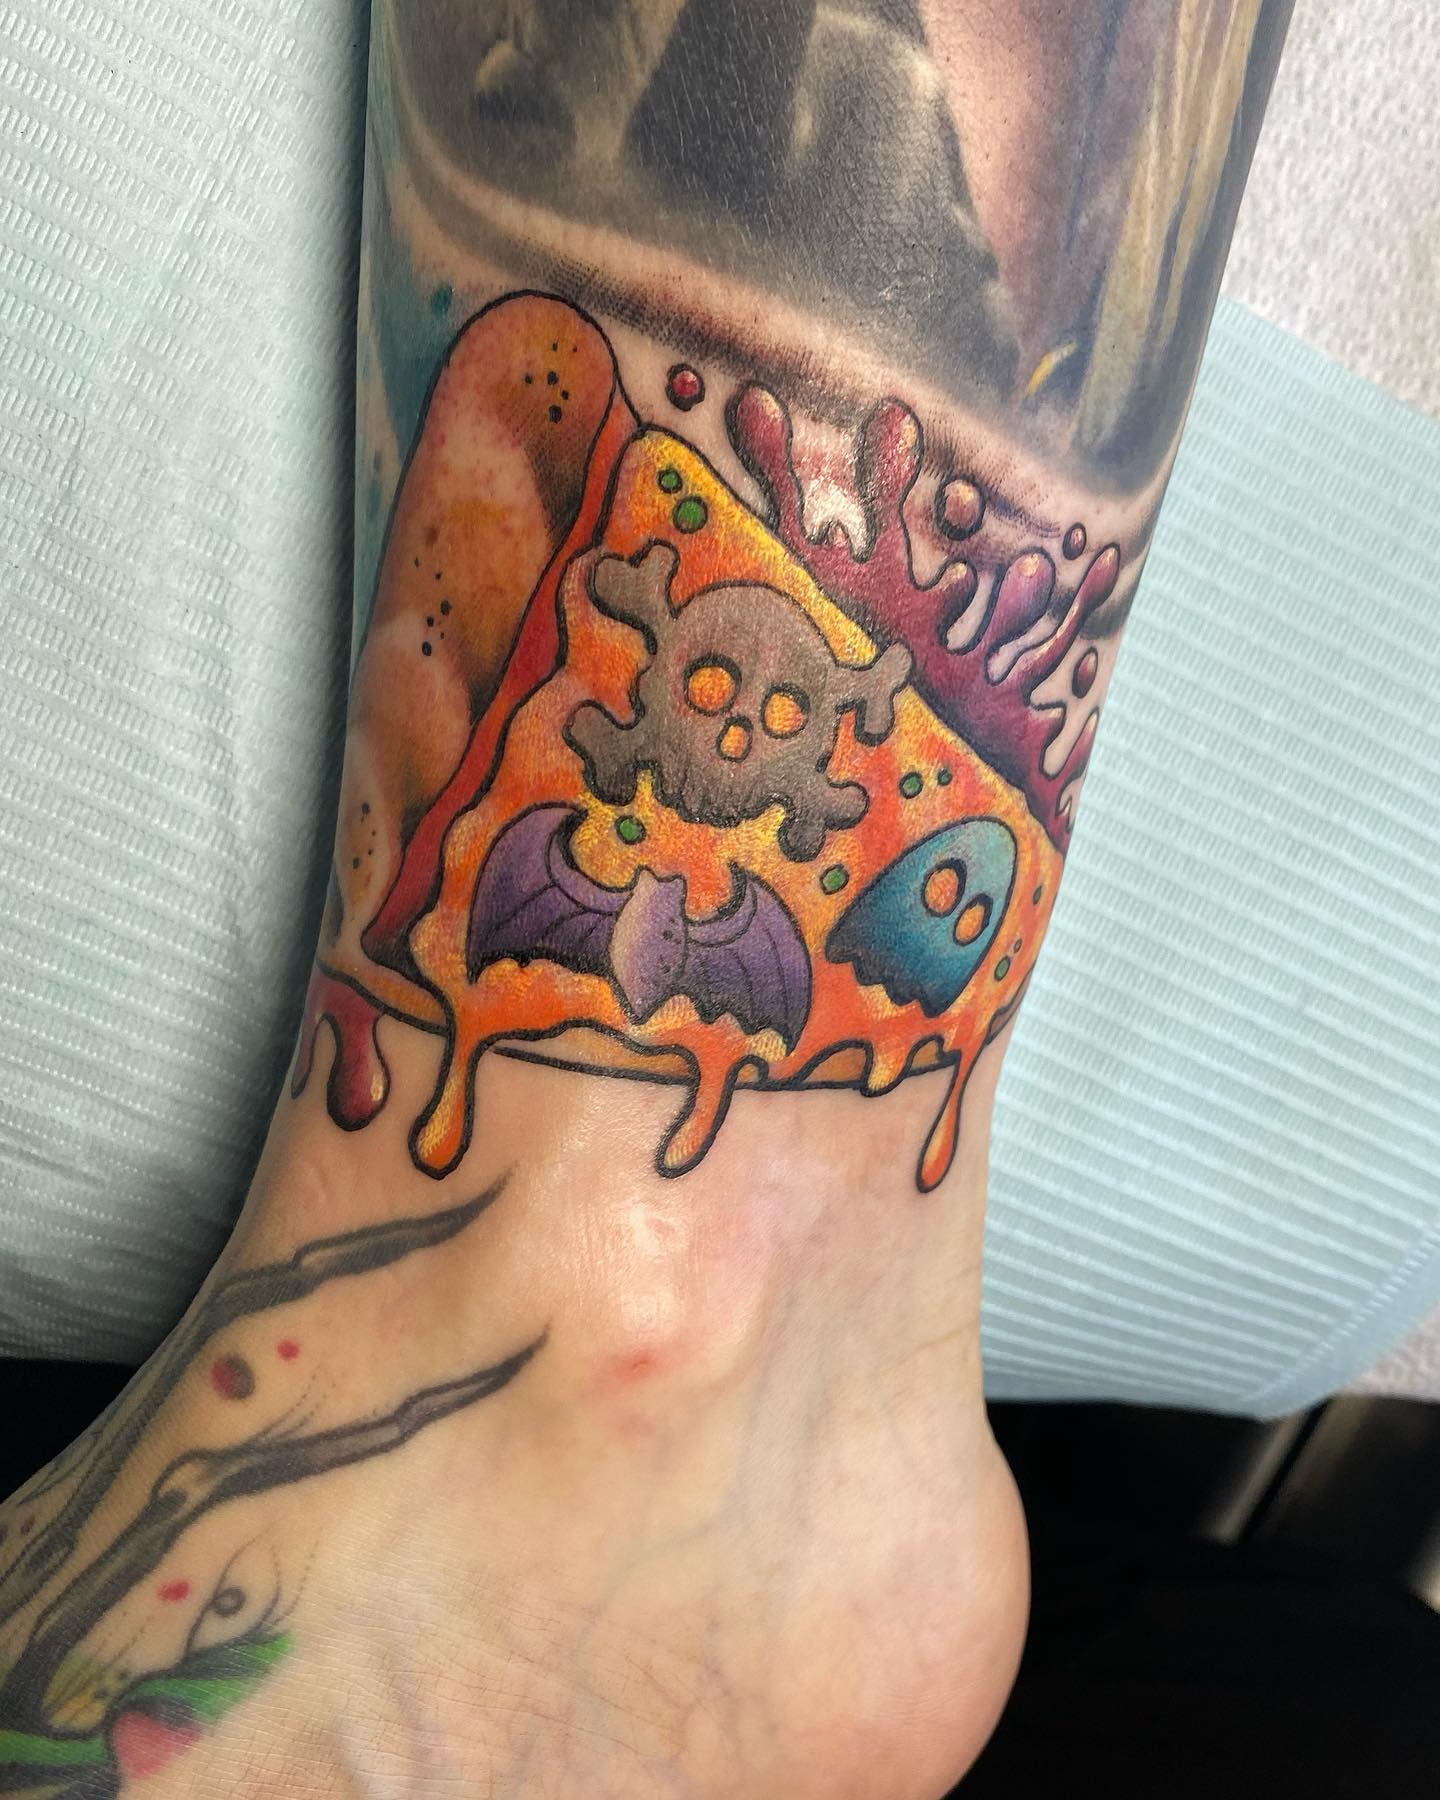 Bright, wild, and colorful ankle tattoo such as this one is for anyone who enjoys pop art and loud ink. Heads up since bright and loud tattoos such as this one can be tricky, pricey, and time-consuming to get.